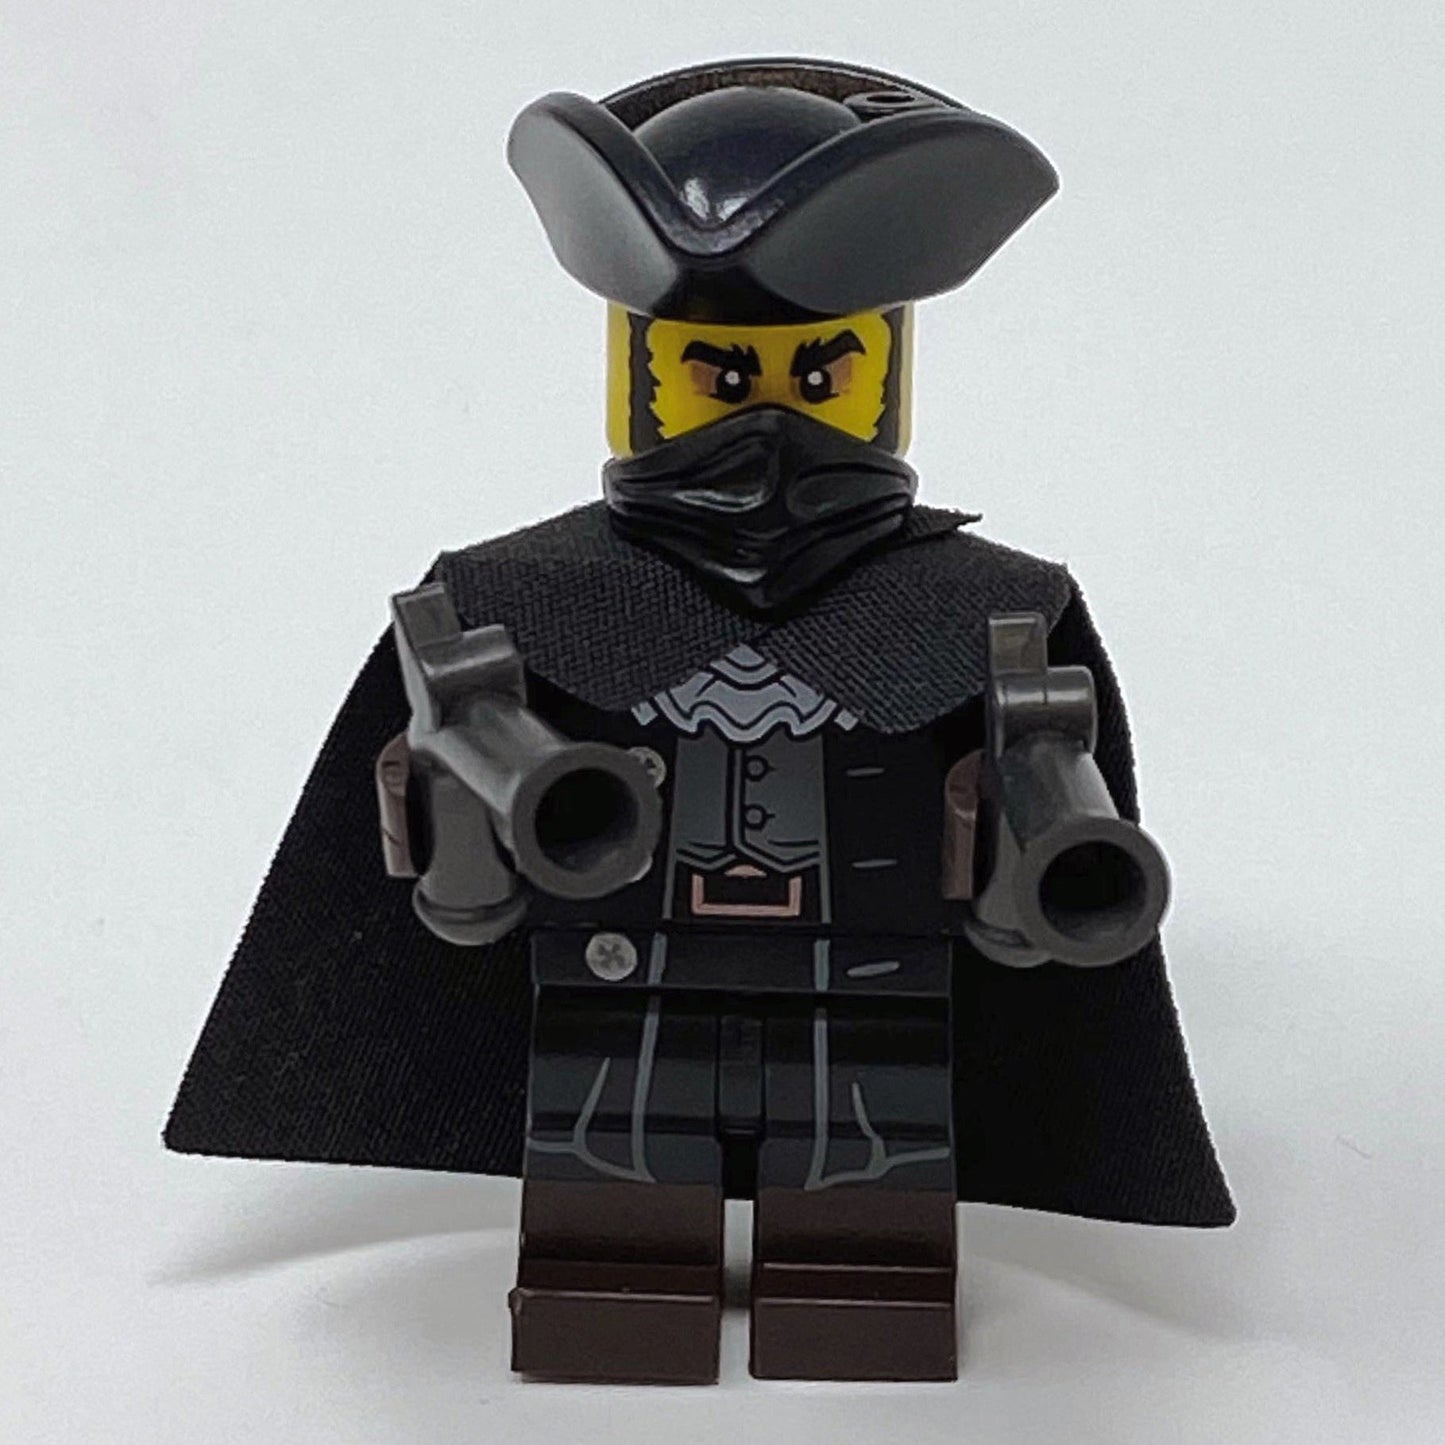 S17 The Mystery Man (Highwayman) - Series 17 Minifigure (col301)